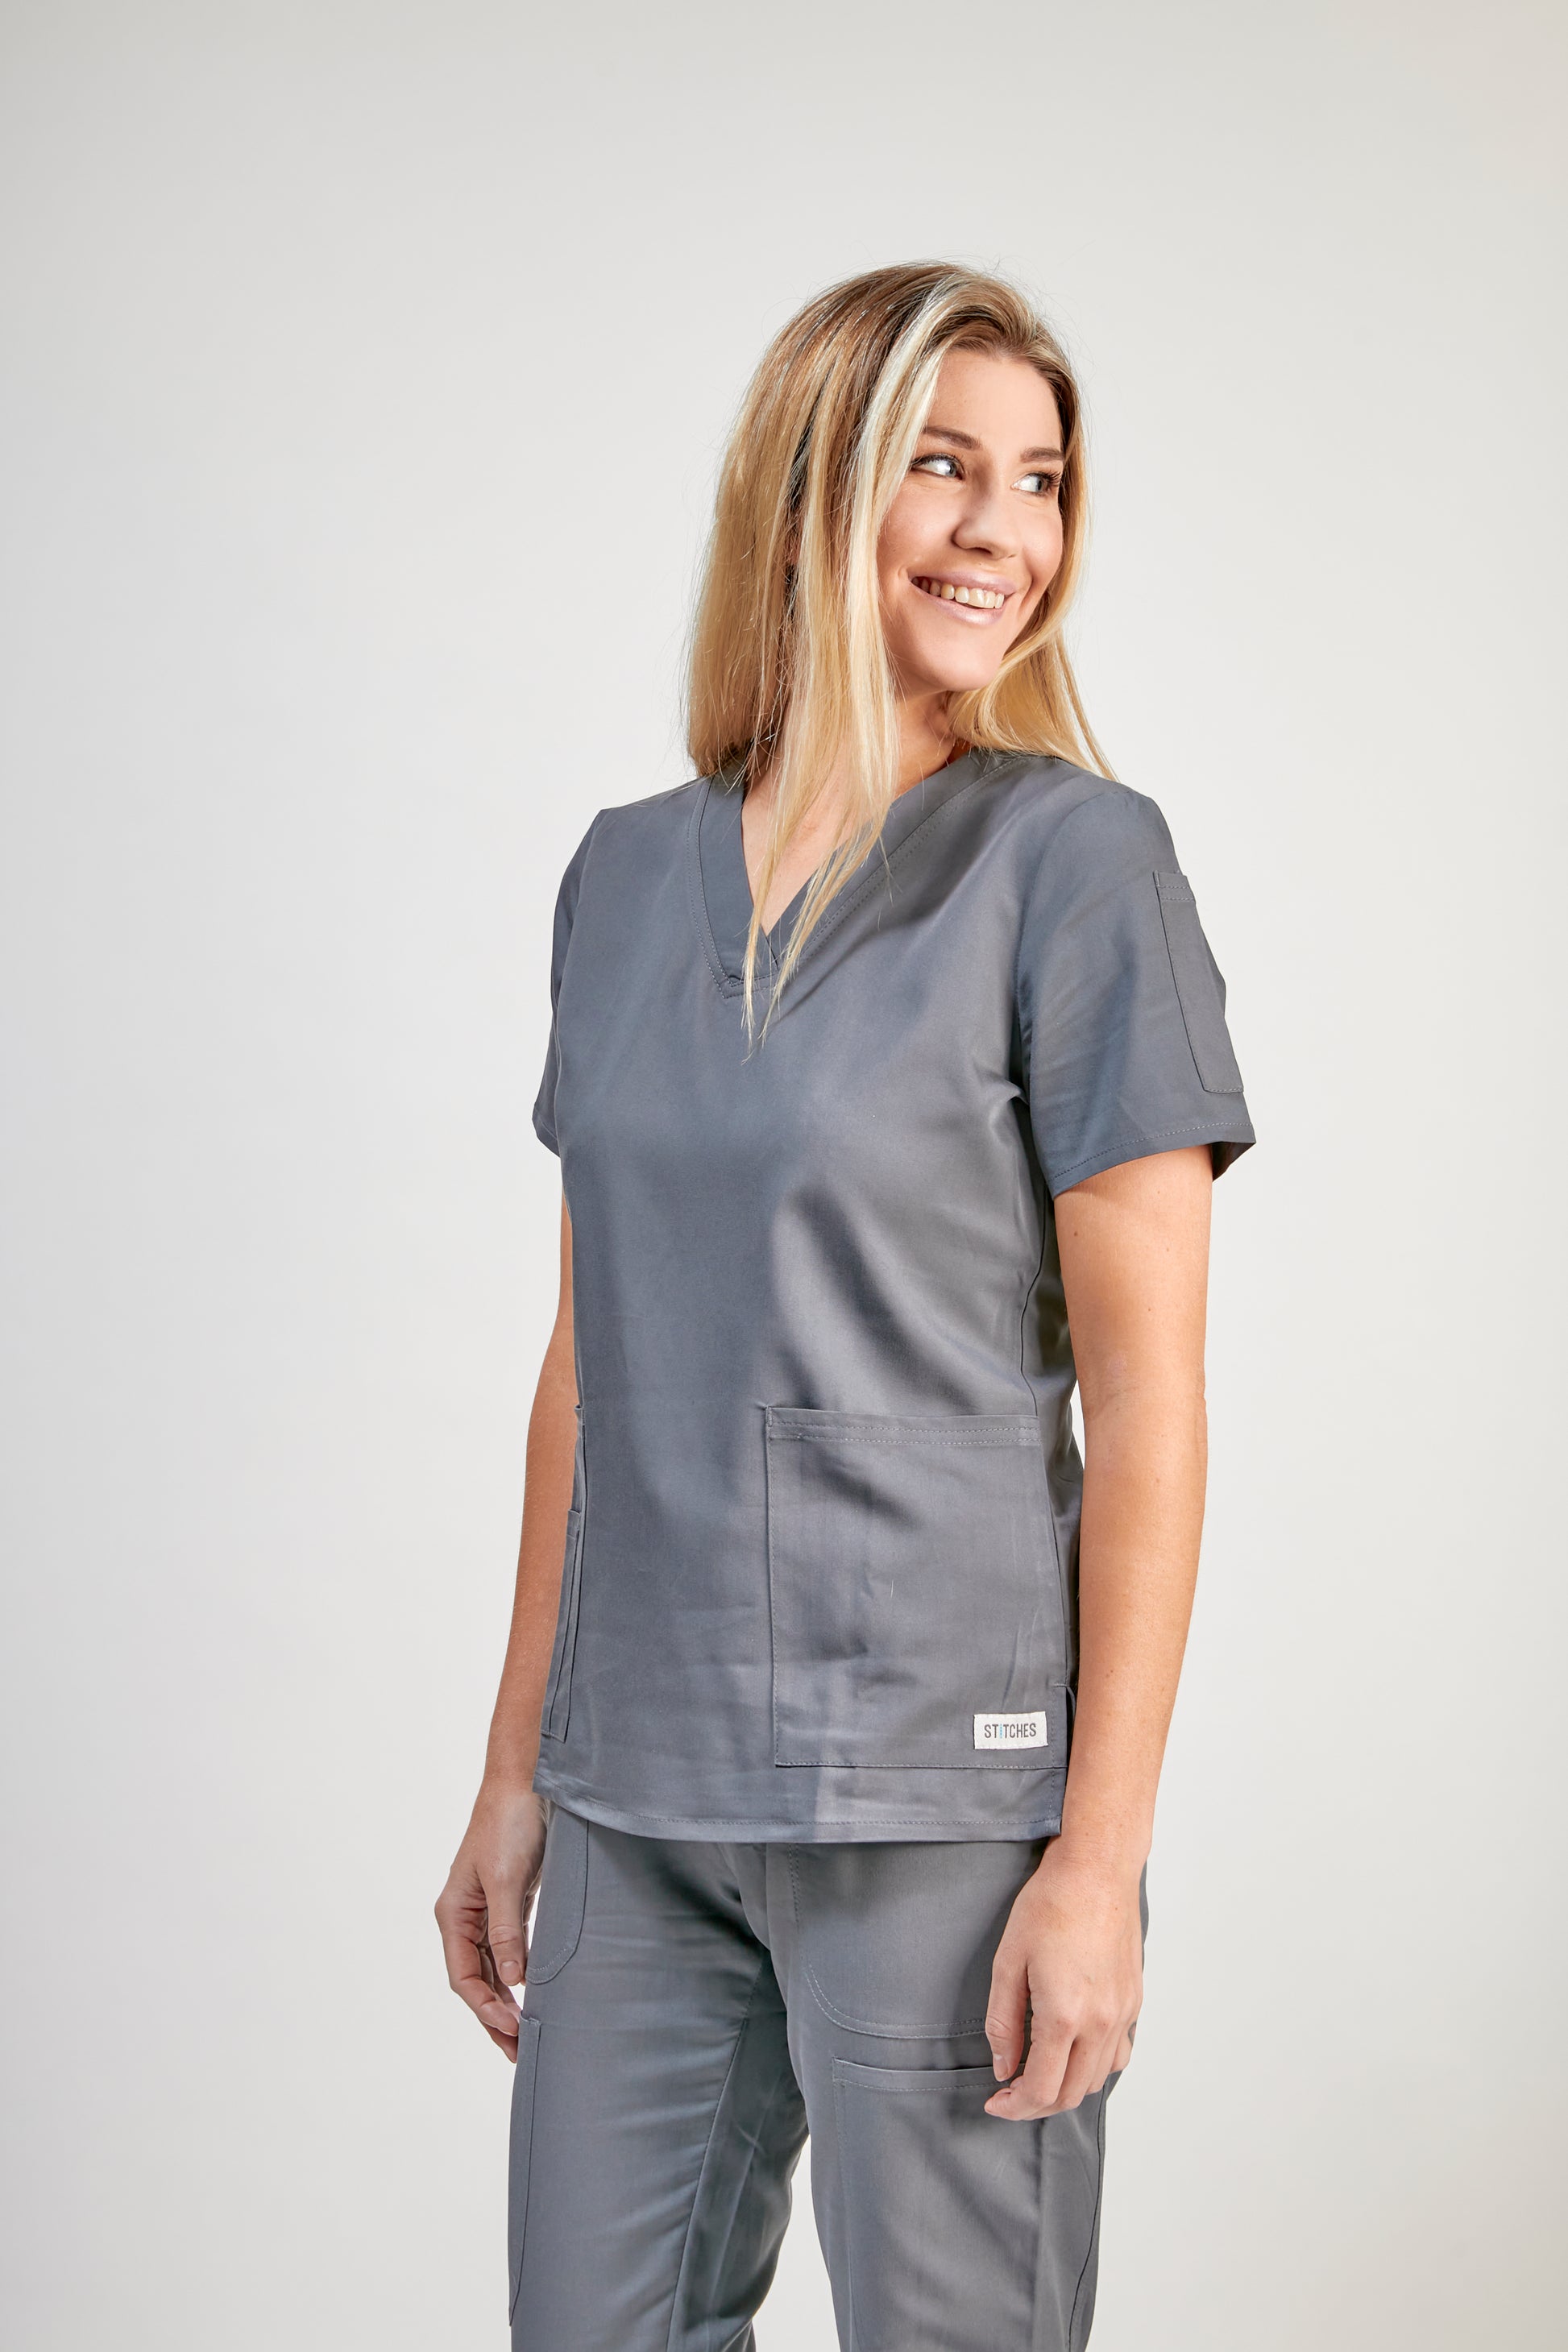 Uniforme clinico mujer one gris